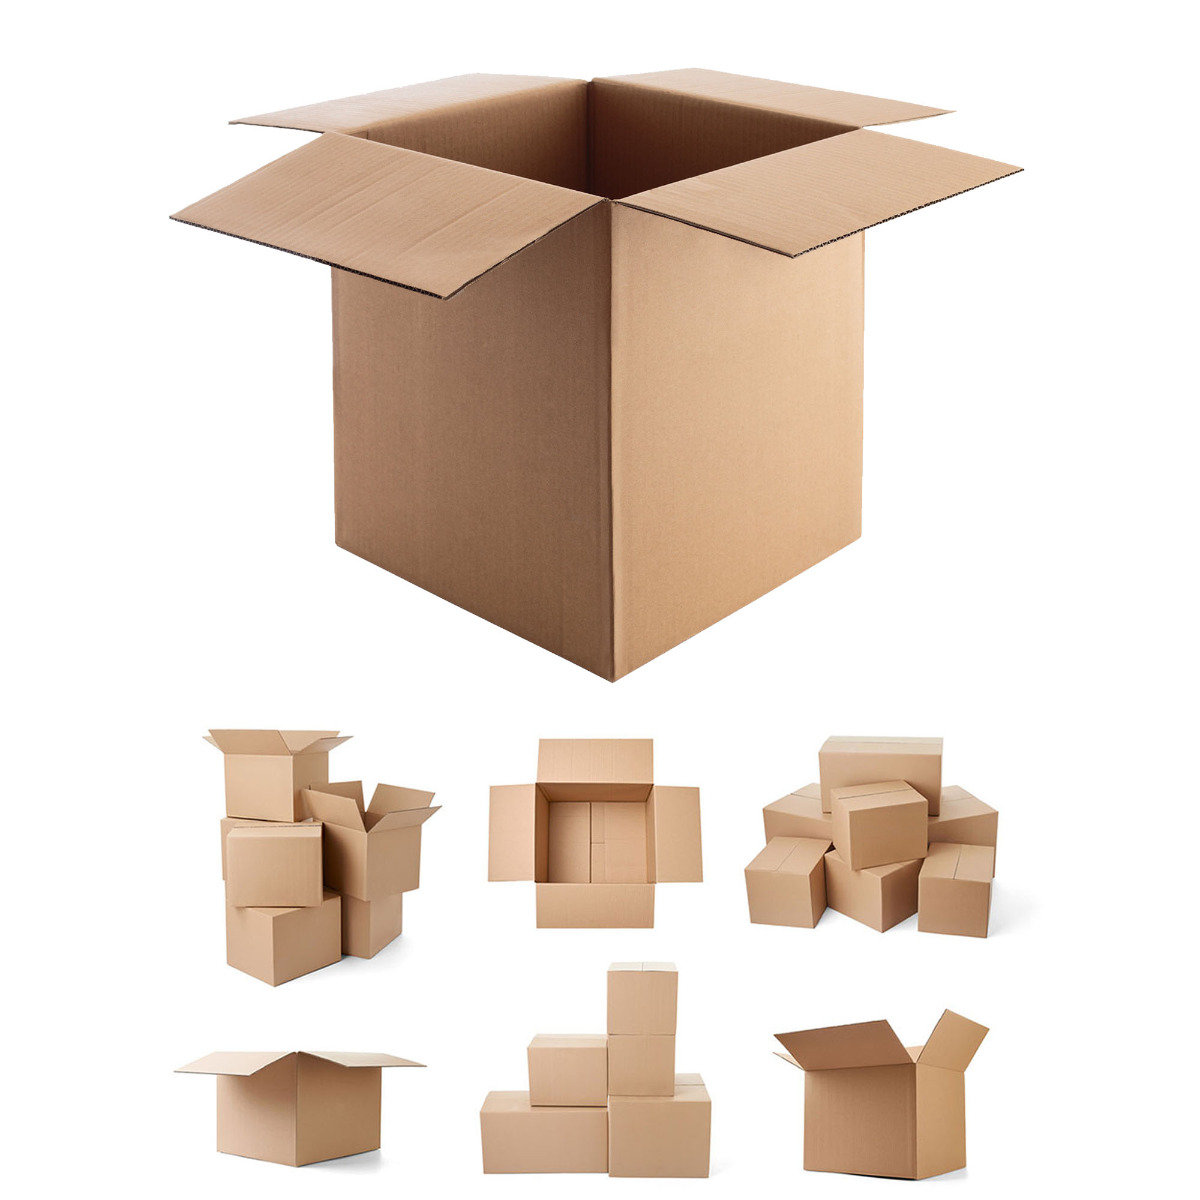 10 x Large UK Cardboard Packing Boxes 21x16x12 Single Wall Postal Packaging Cartons for Moving & Storage 